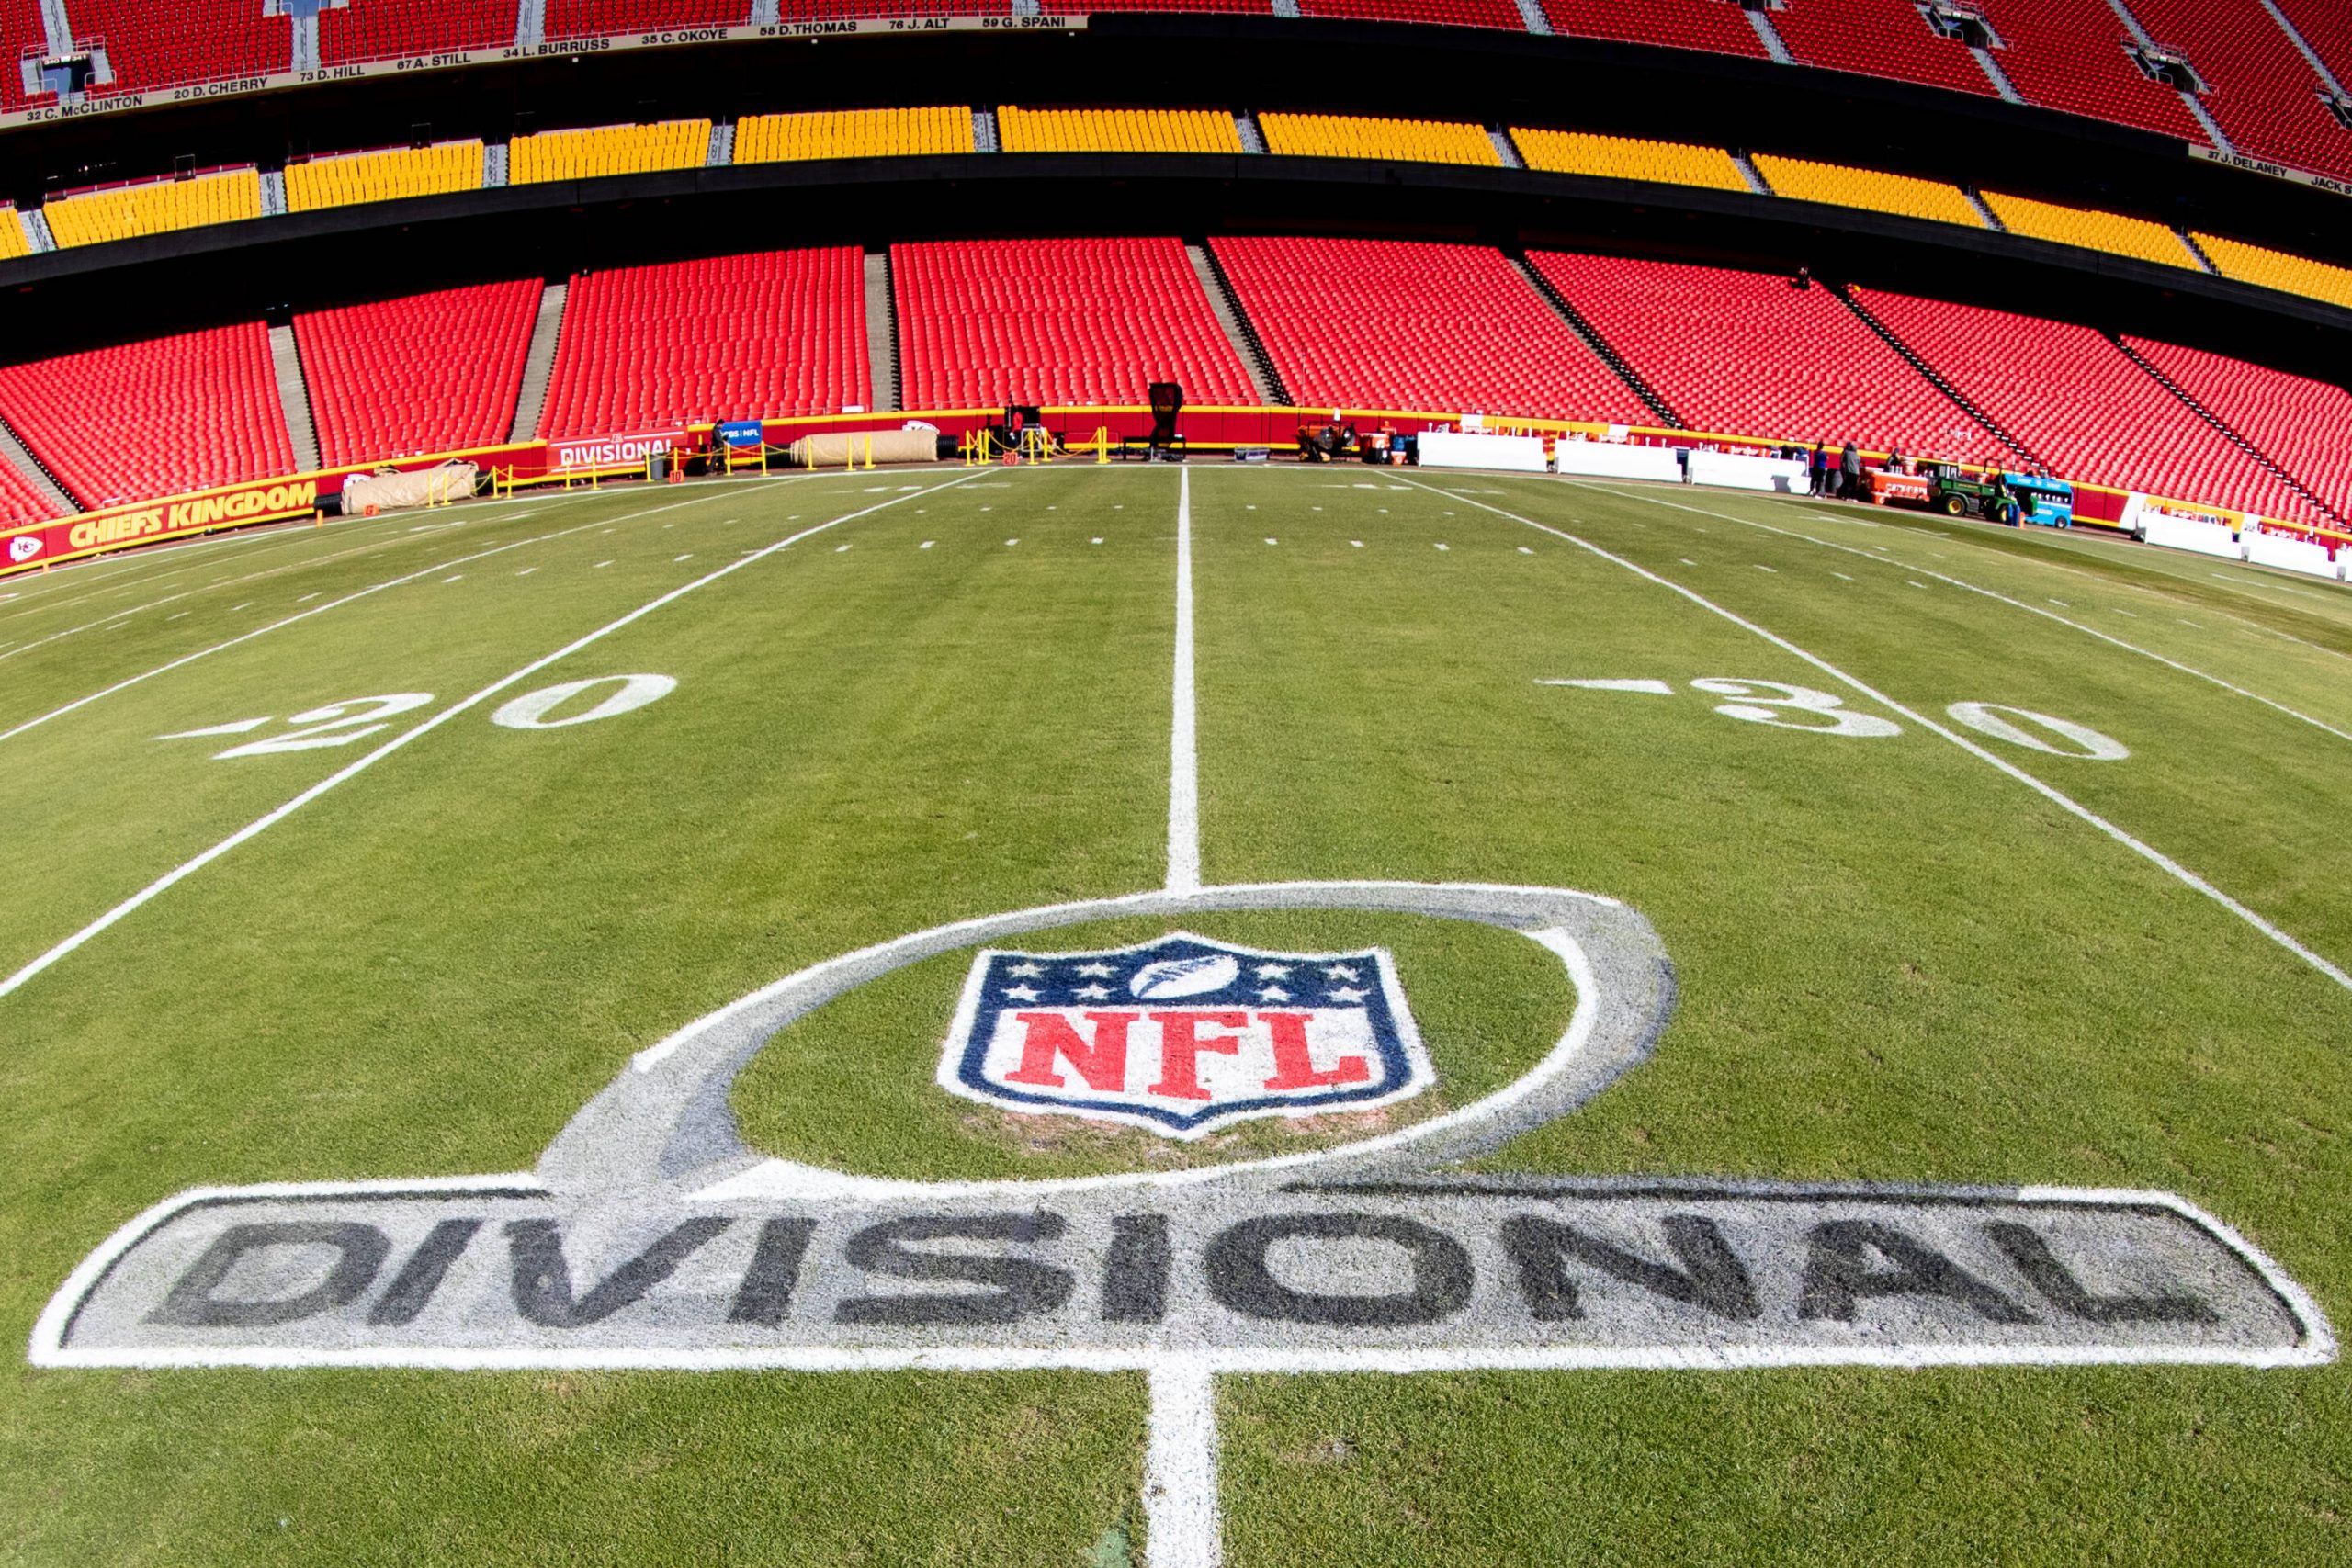 KANSAS CITY, MO - JANUARY 23: NFL, American Football Herren, USA Divionsal logo on the field prior to the game between the Kansas City Chiefs and the Buffalo Bills on January 23rd, 2022 at GEHA field at Arrowhead Stadium in Kansas City, Missouri. Photo by William Purnell/Icon Sportswire NFL: JAN 23 AFC Divisional Round - Bills at Chiefs Icon2201230015